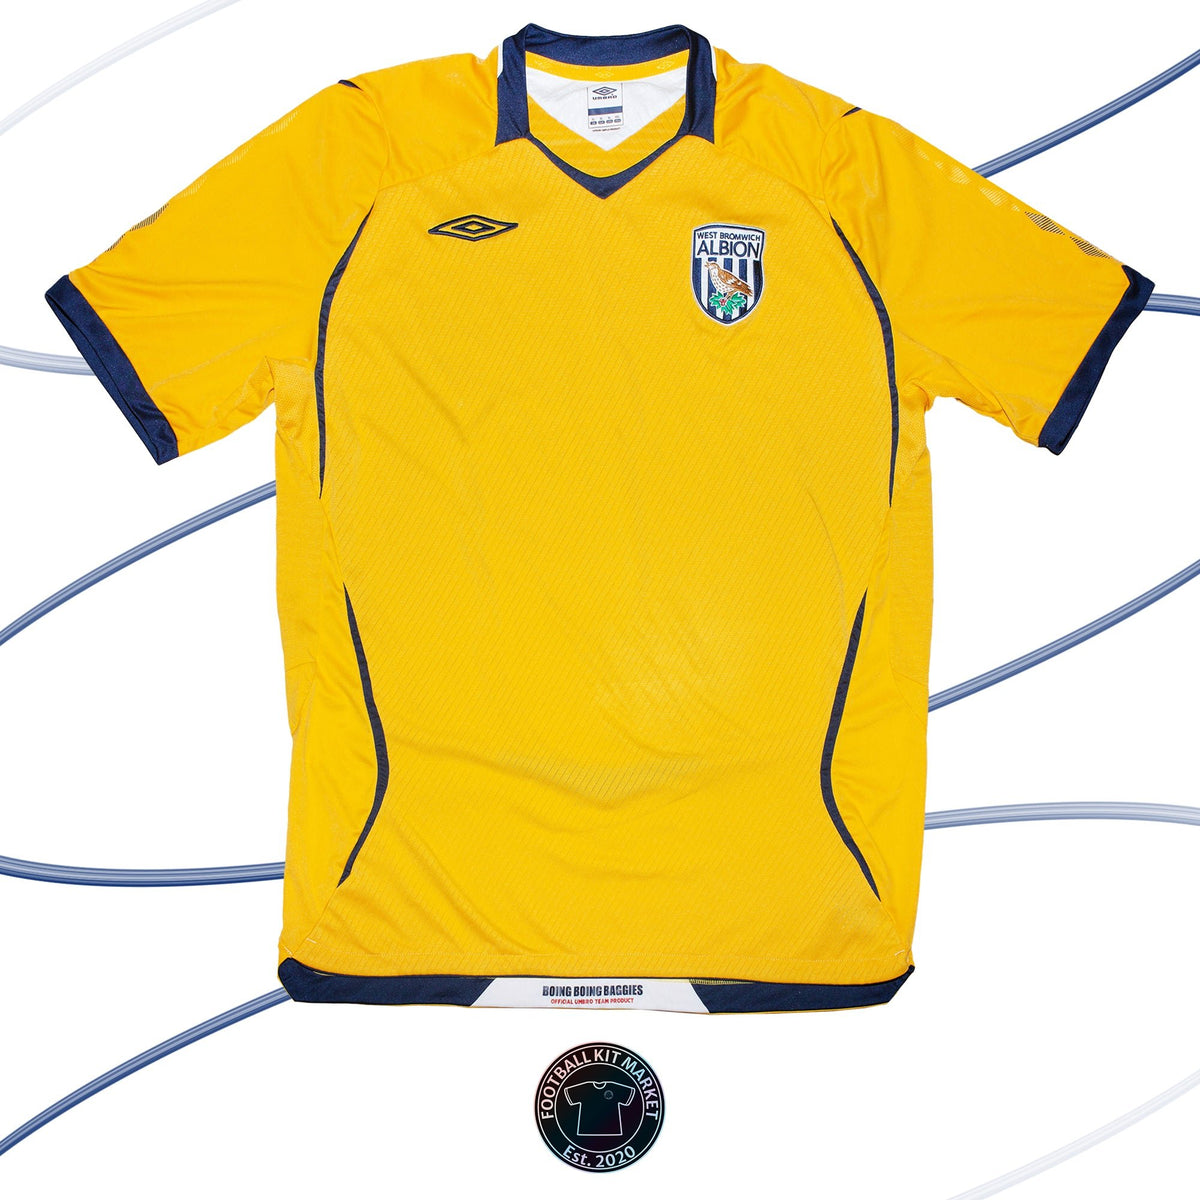 Genuine WEST BROMWICH ALBION Away (2008-2009) - UMBRO (XL) - Product Image from Football Kit Market